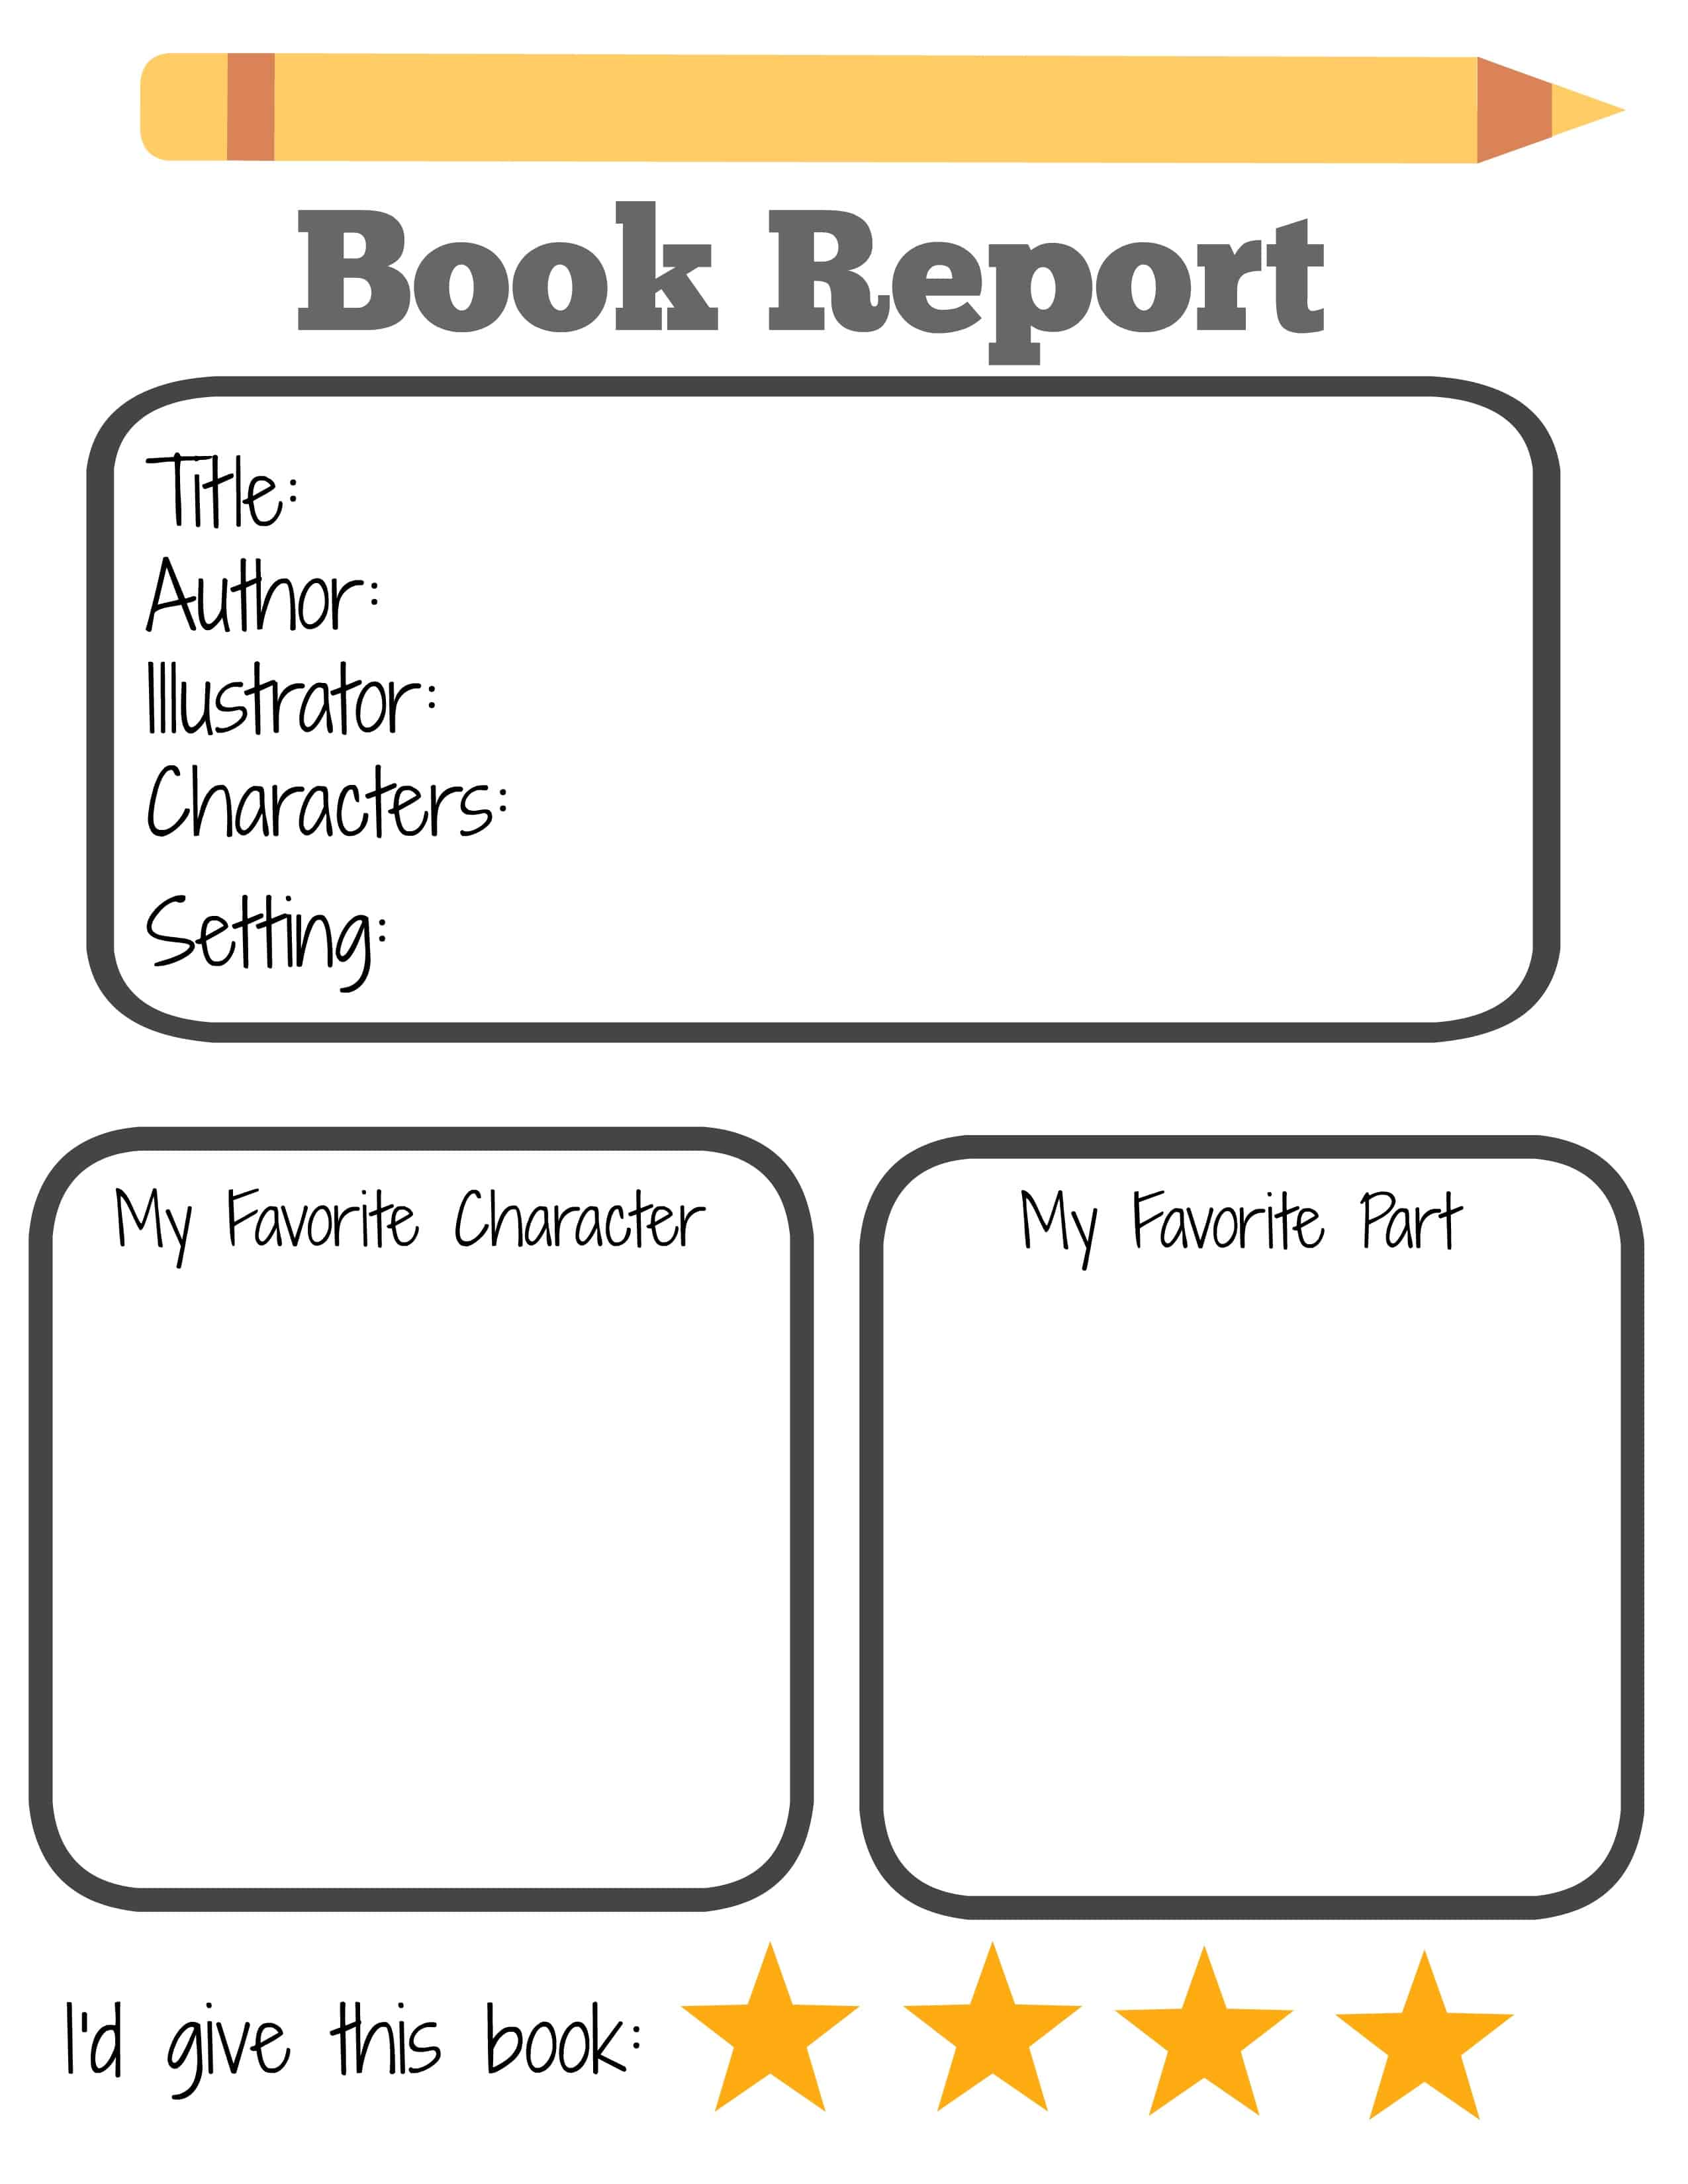 Book Reports For Kids Printable - Book Report Form and Reading Log